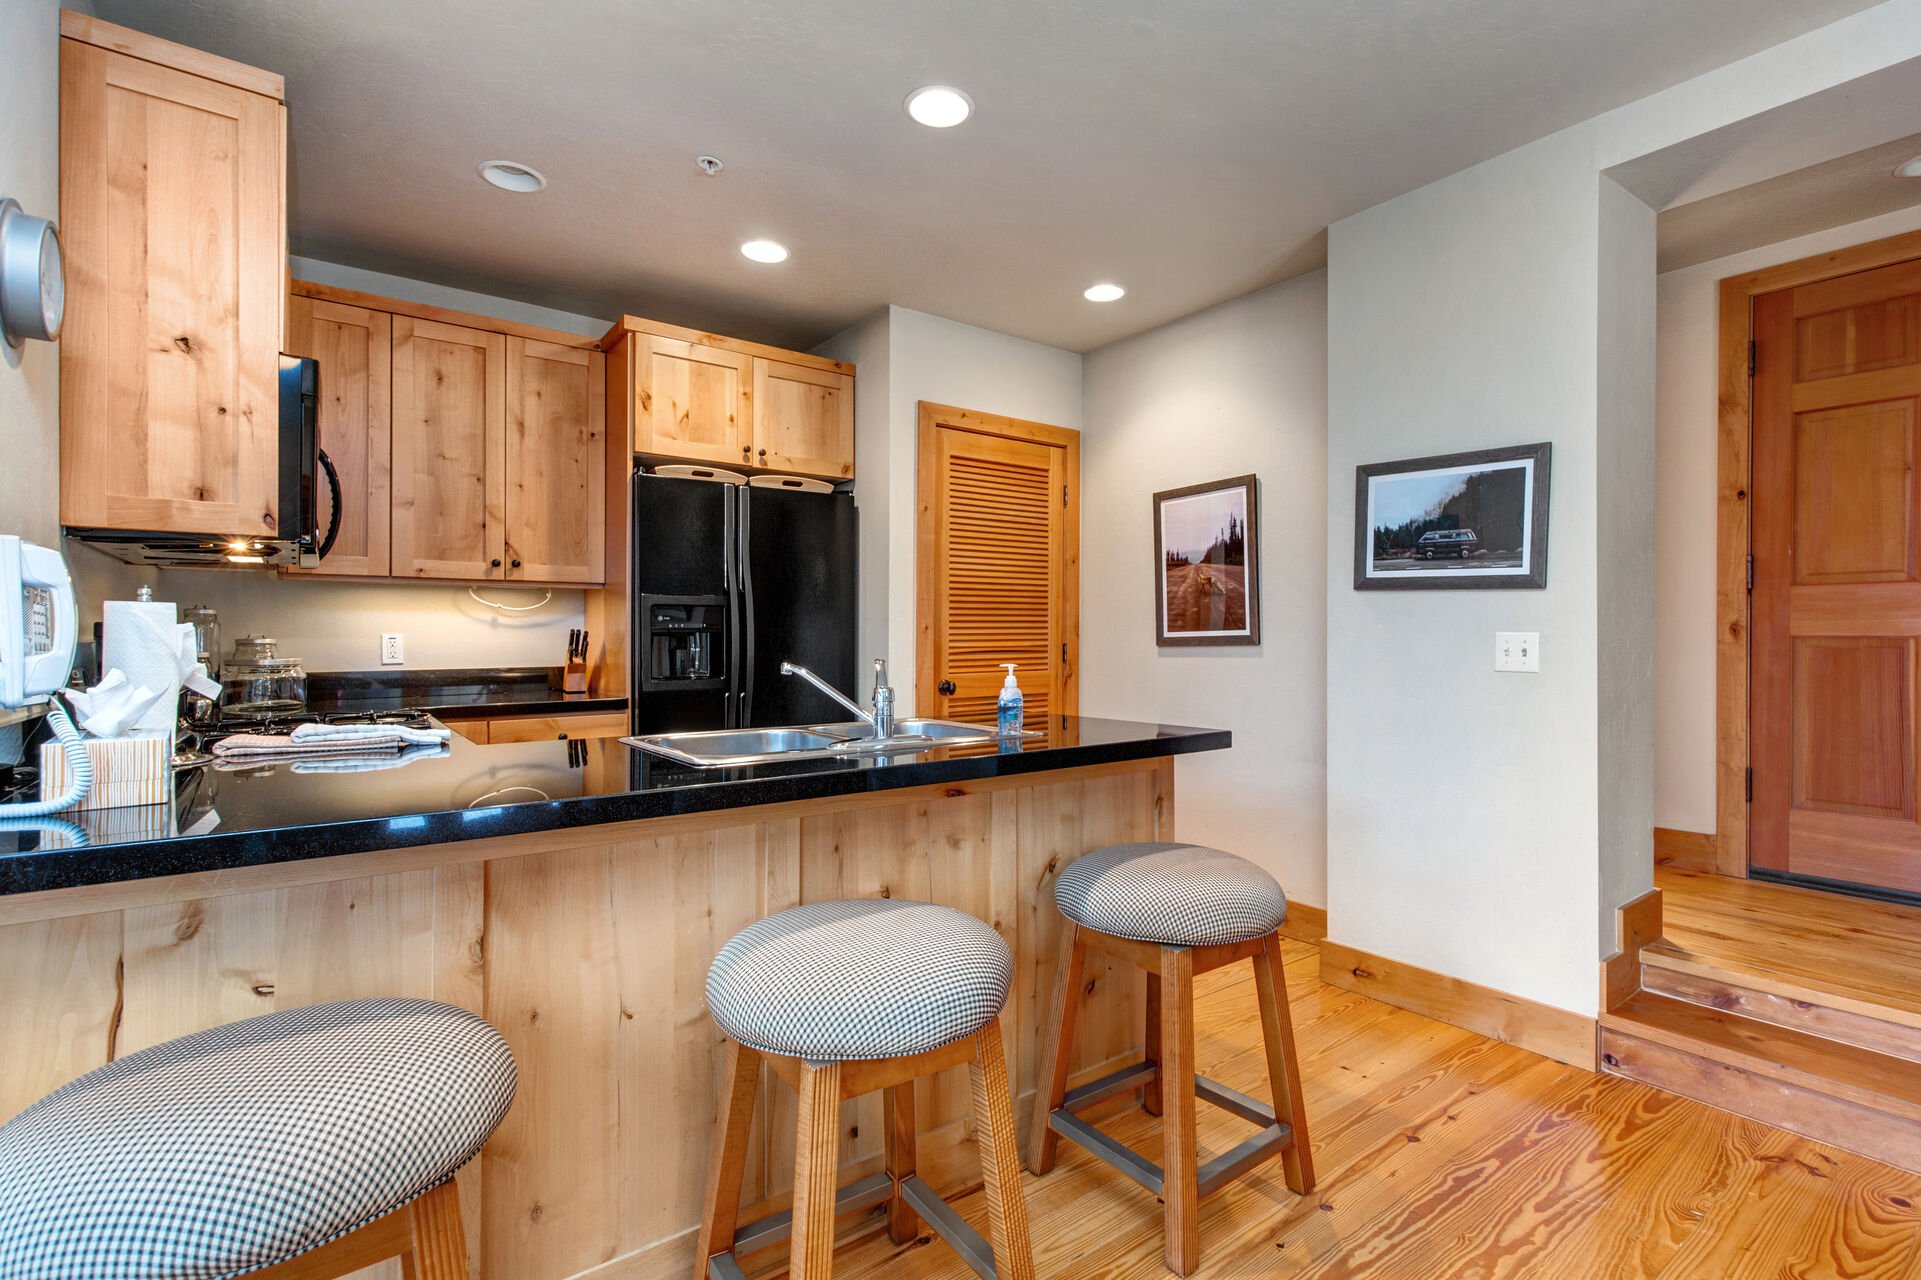 Fully Equipped Kitchen with bar seating for three, beautiful stone countertops, modern appliances, and ice maker